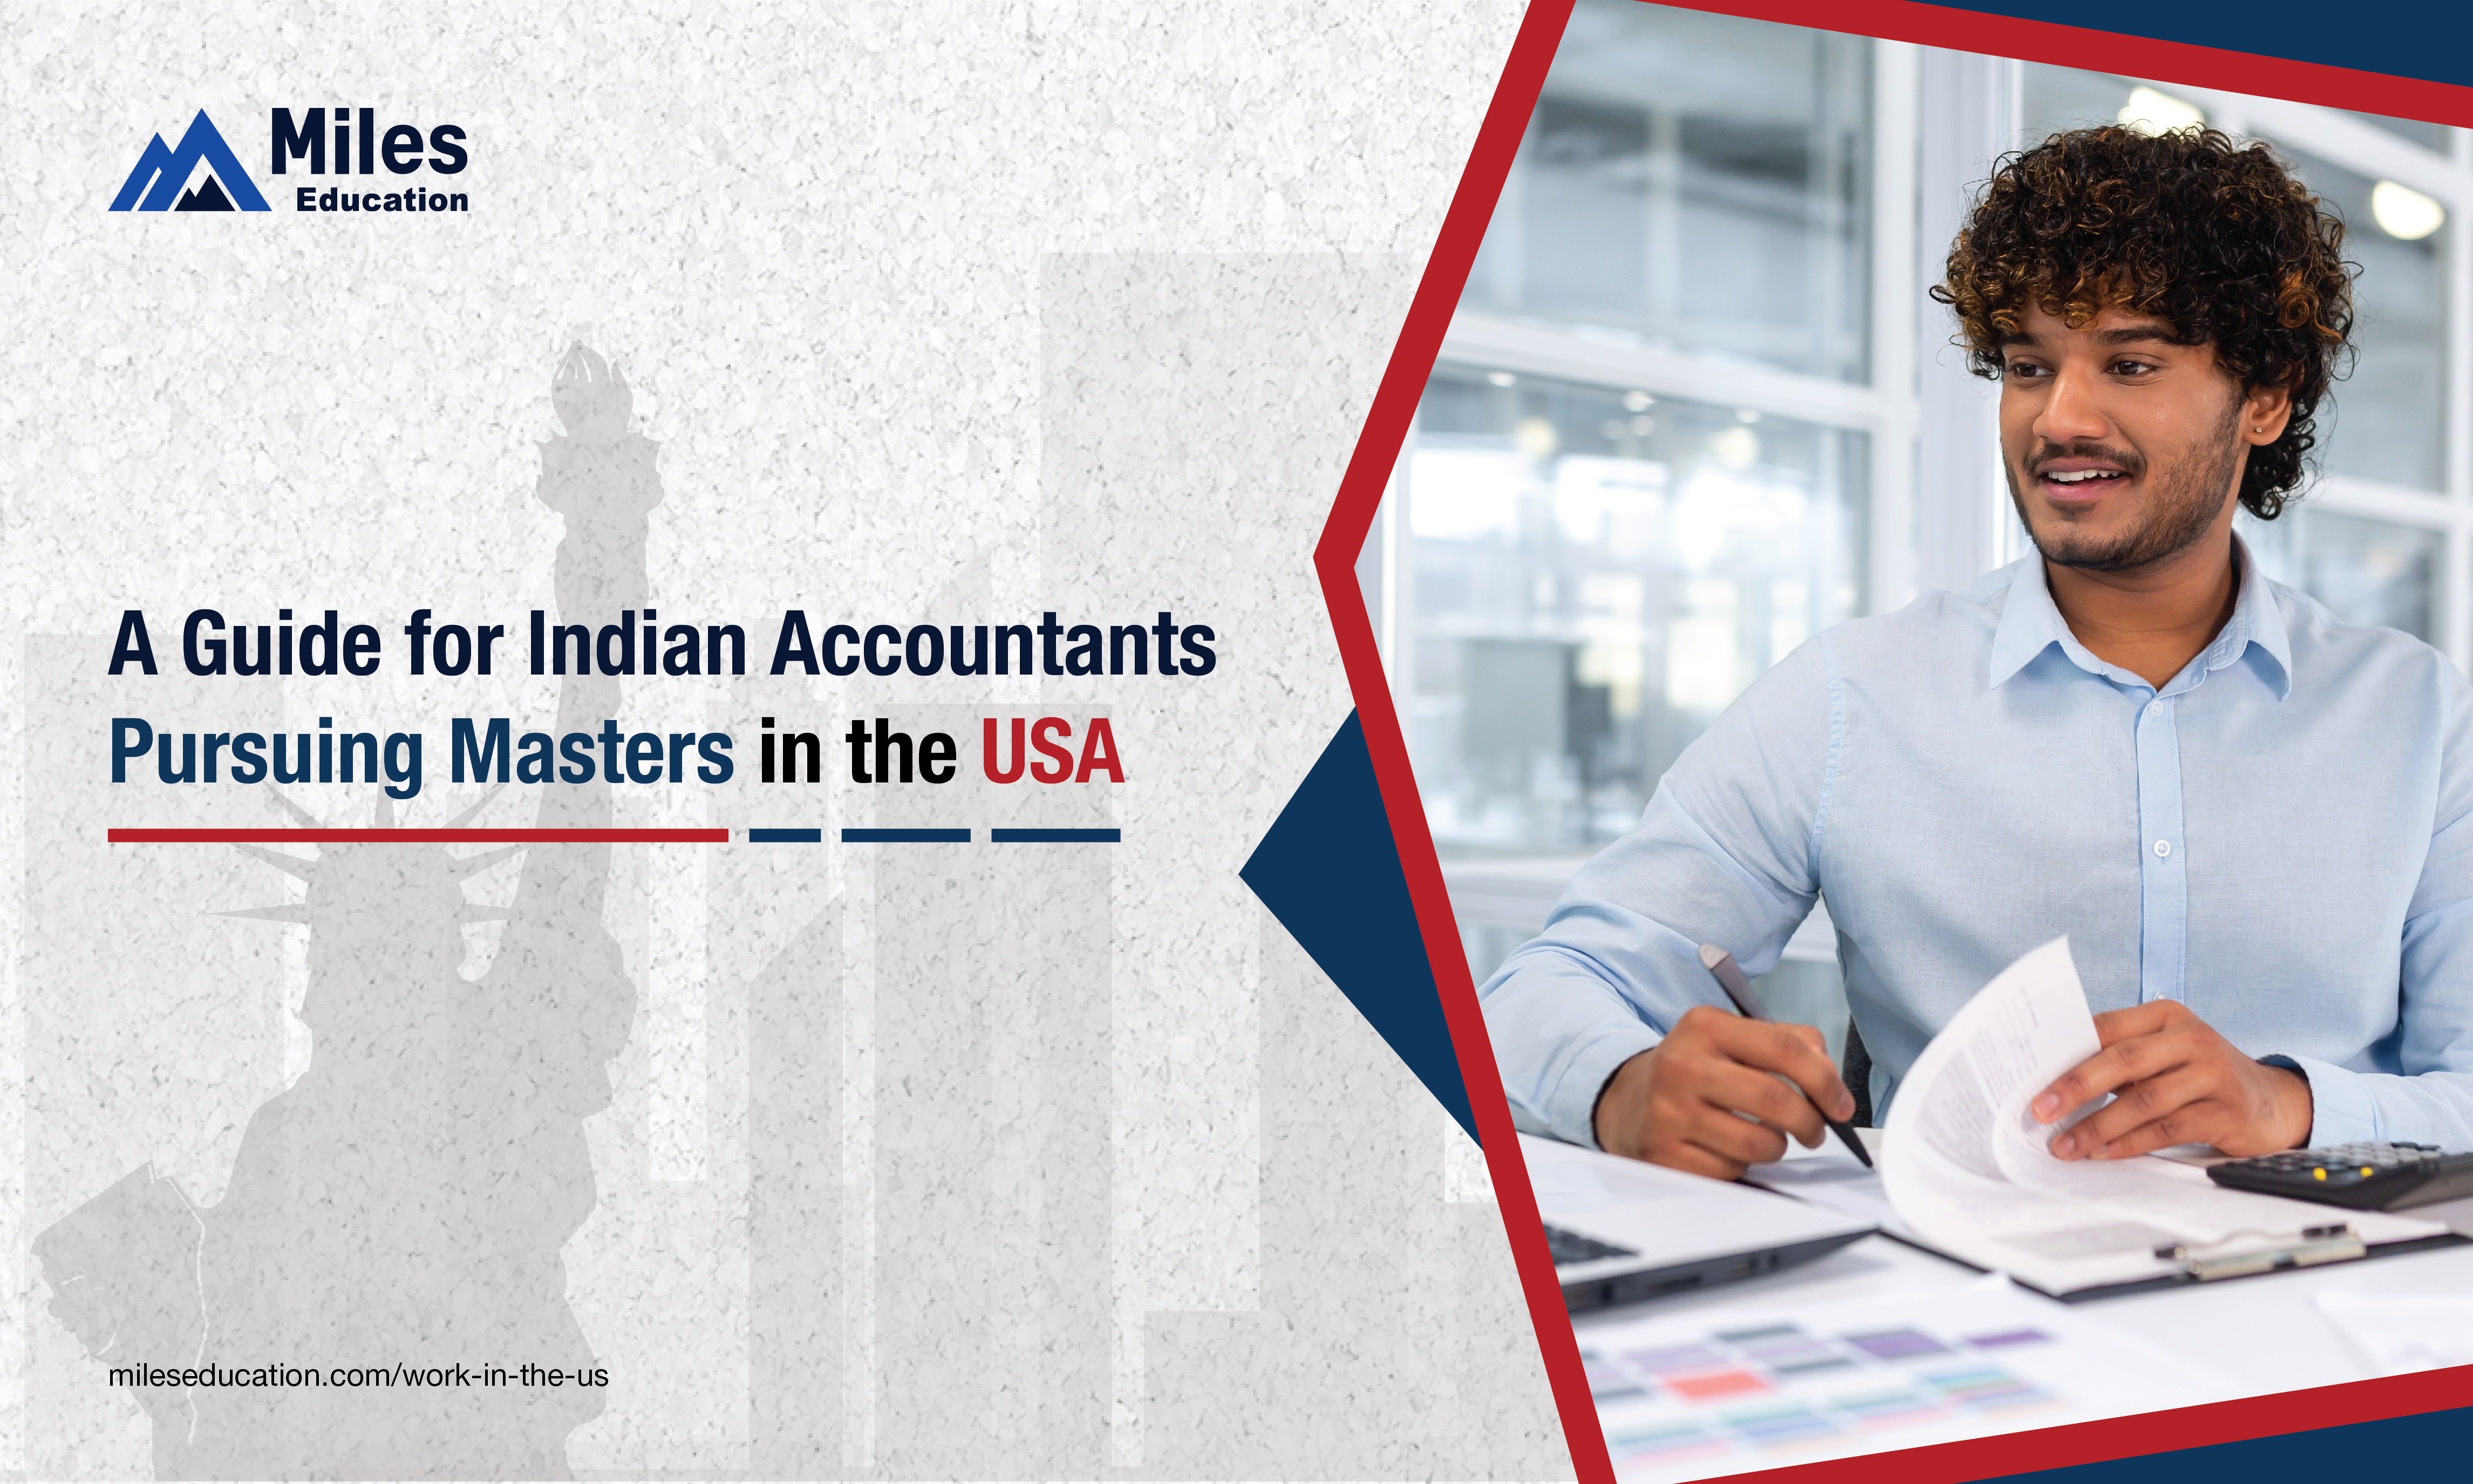 masters in the USA for Indian accountants